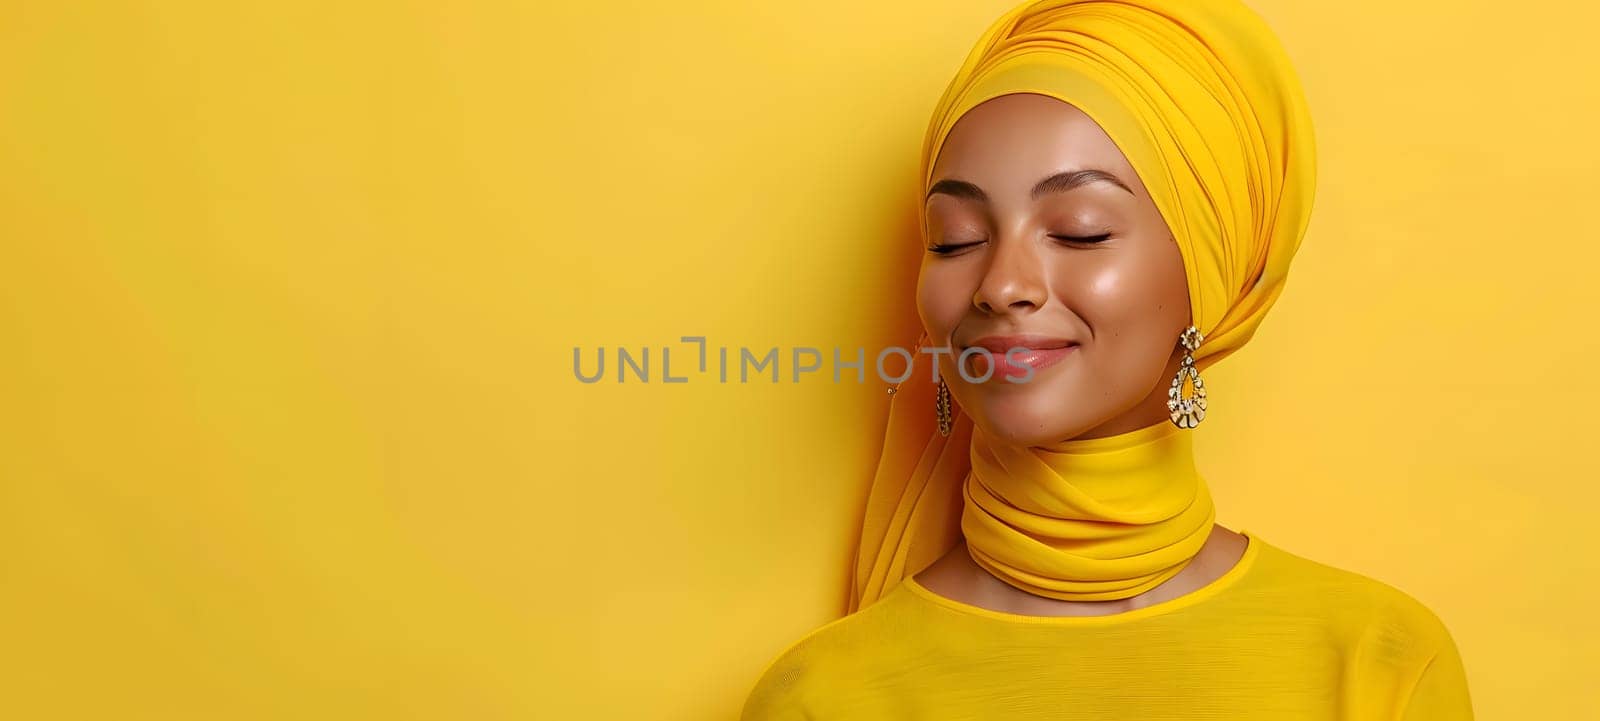 A woman with long hair and a yellow hijab is smiling with her eyes closed by Nadtochiy